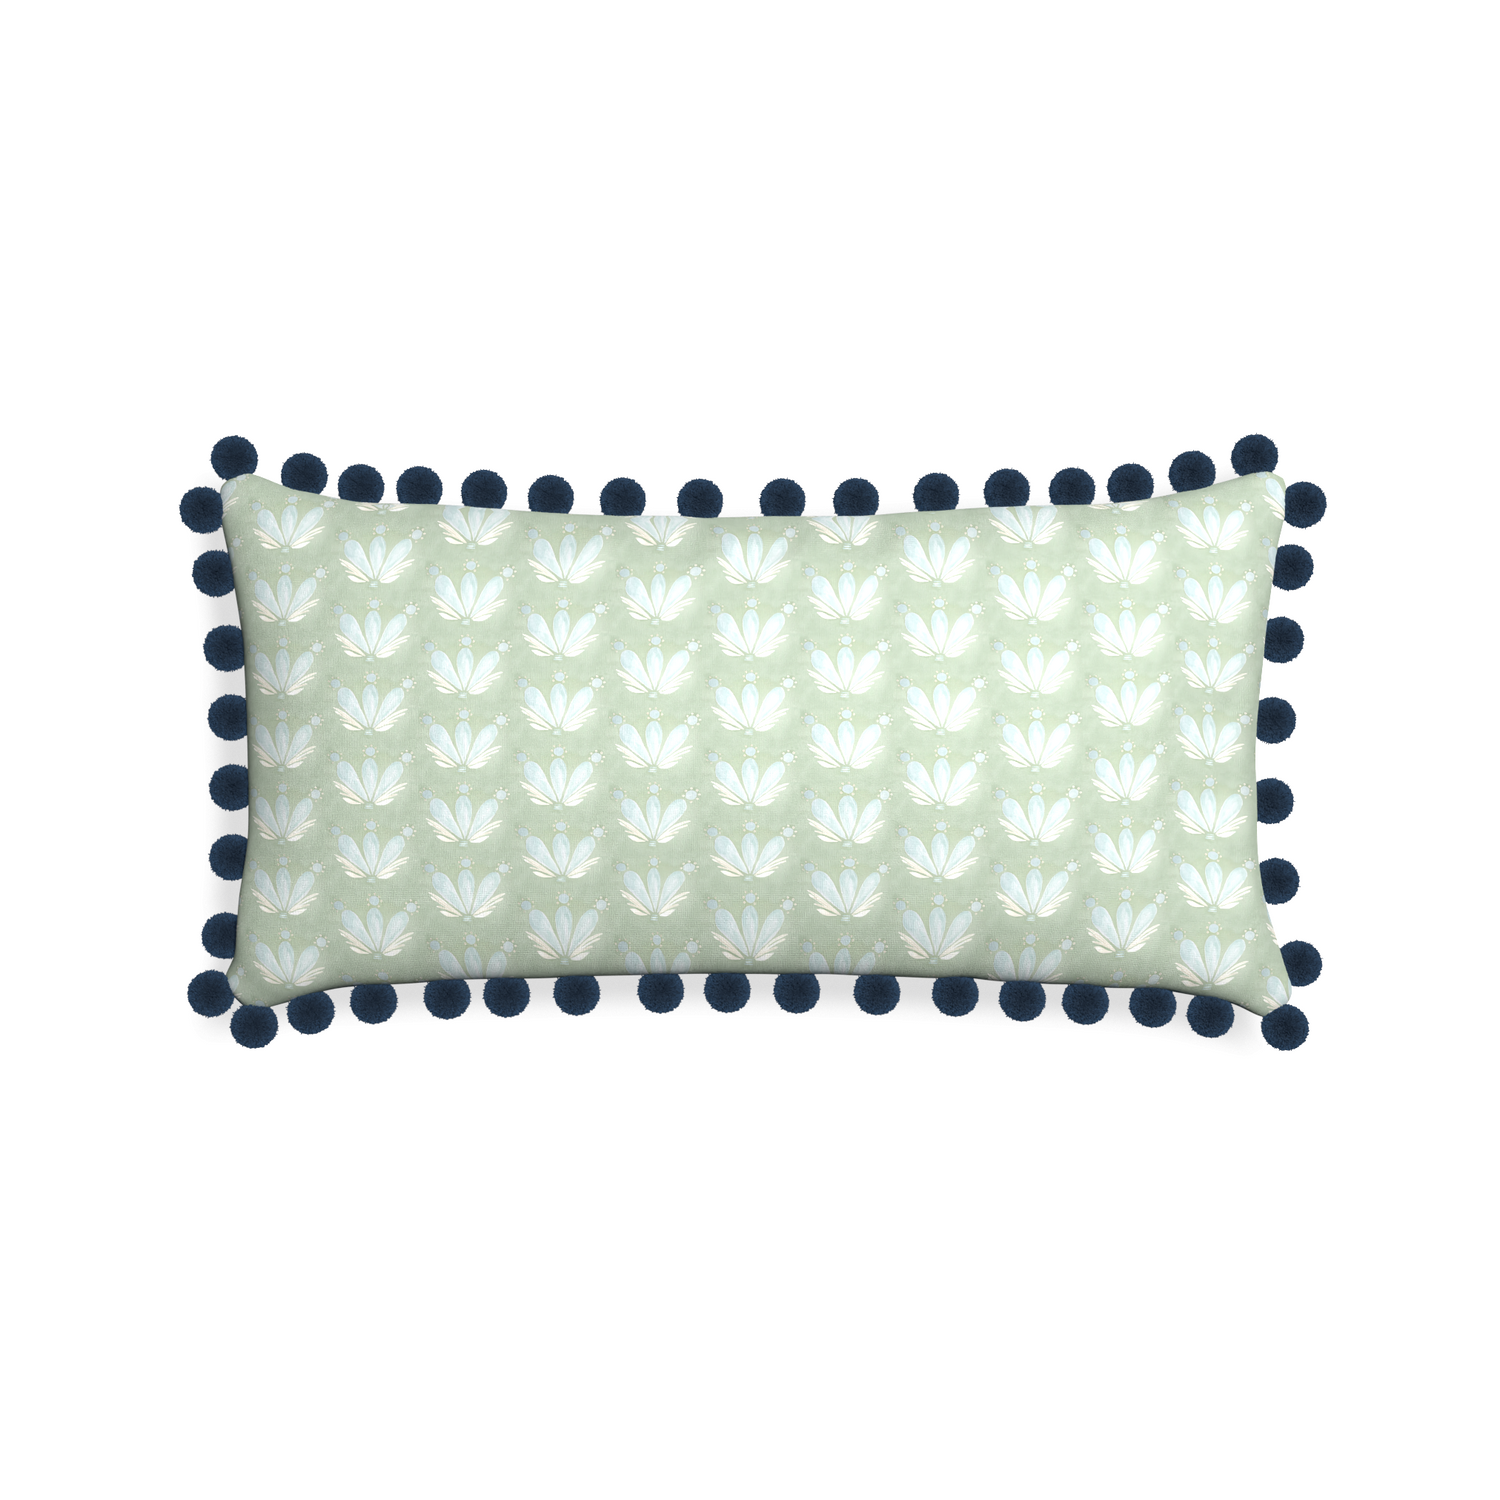 Midi-lumbar serena sea salt custom blue & green floral drop repeatpillow with c on white background